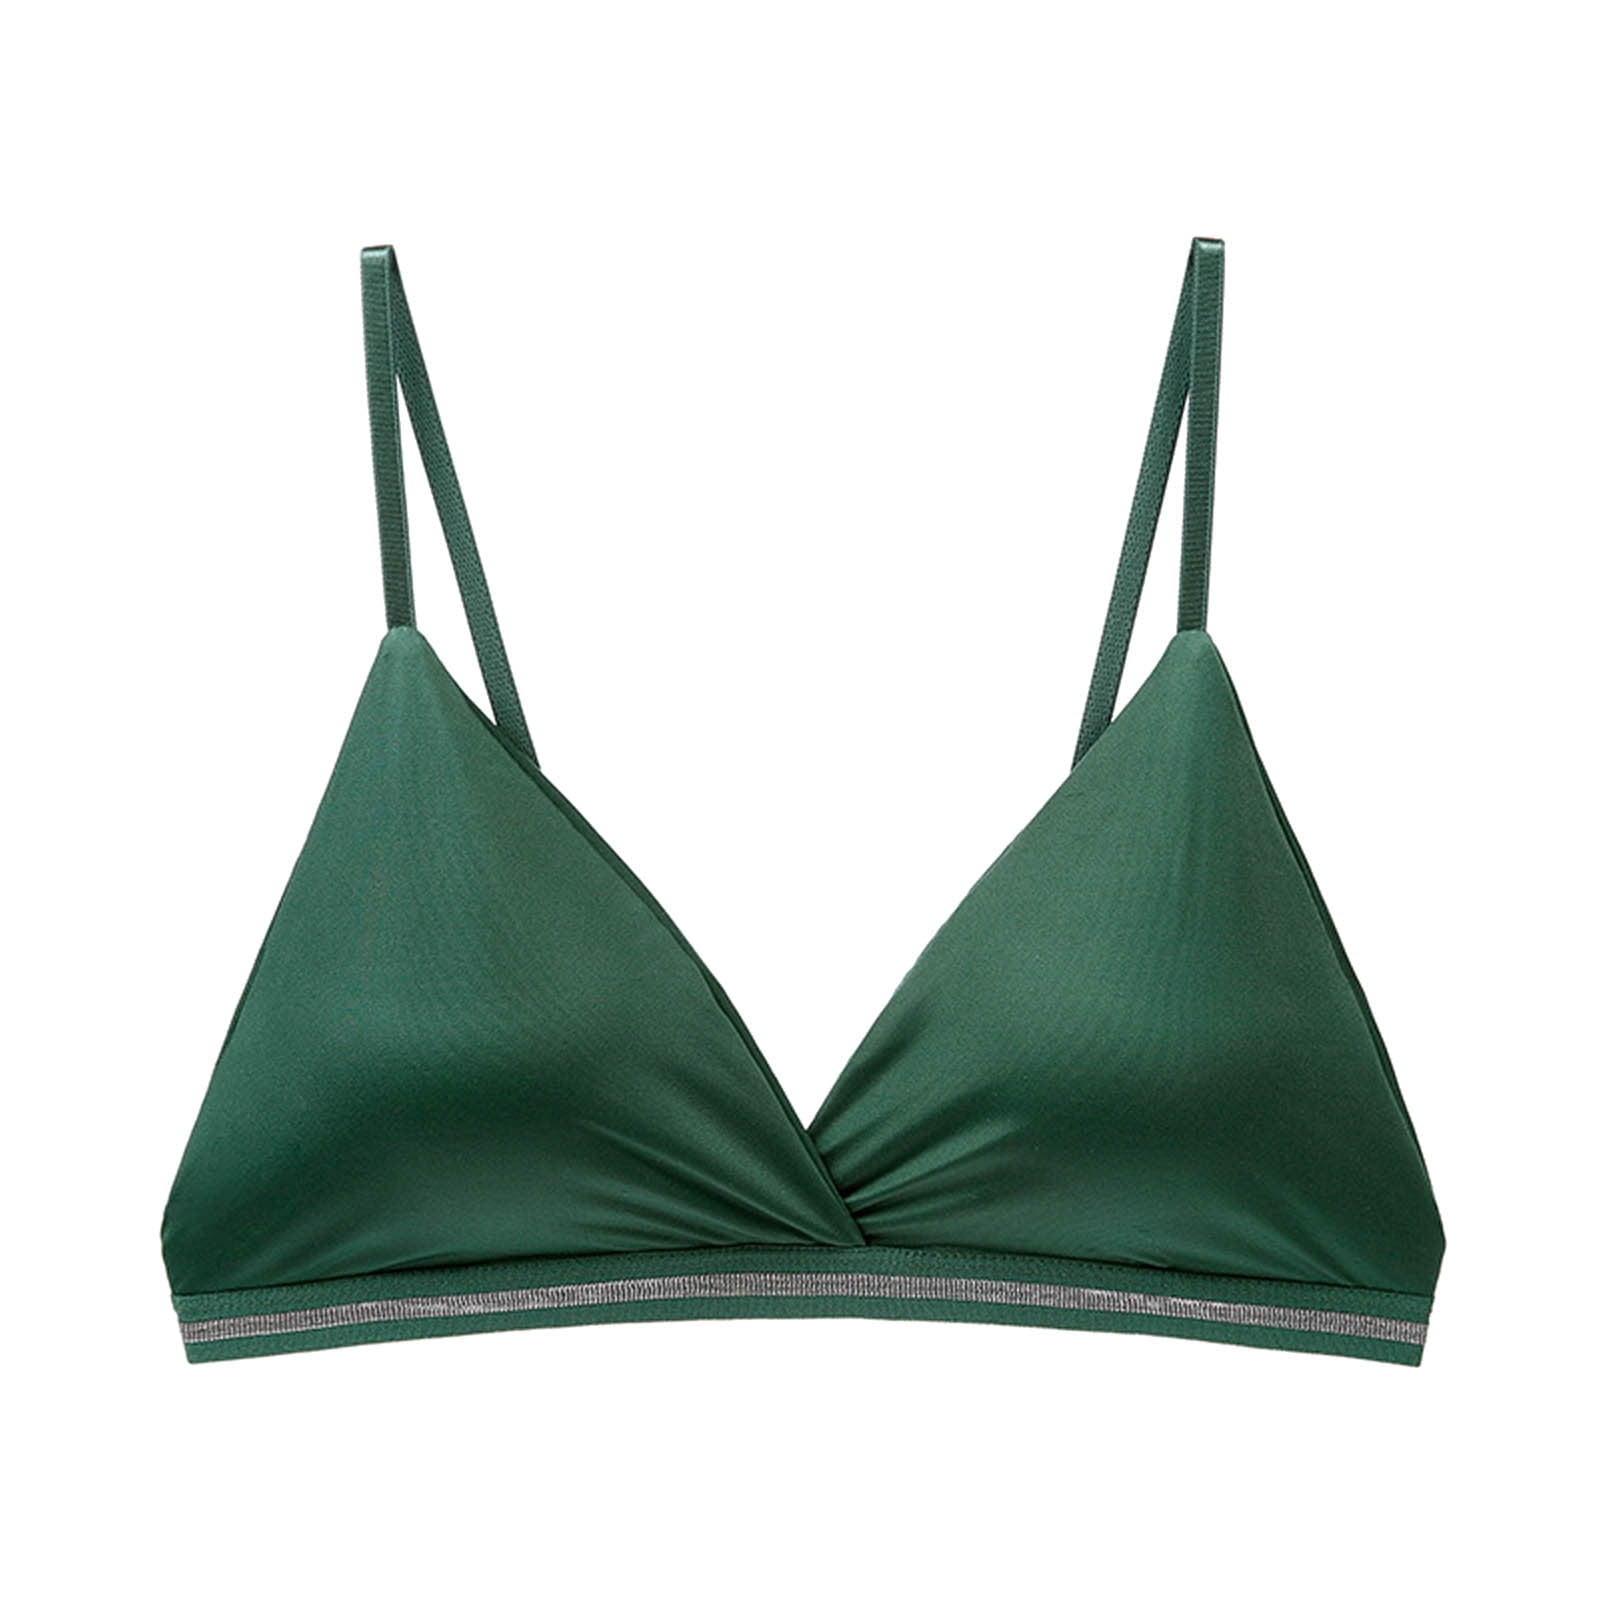 RYRJJ Women's Silk Satin Triangle Bralette Soft Cup Wireless Bra Smooth and  Comfortable Wire Free Bra Top(Green,M)